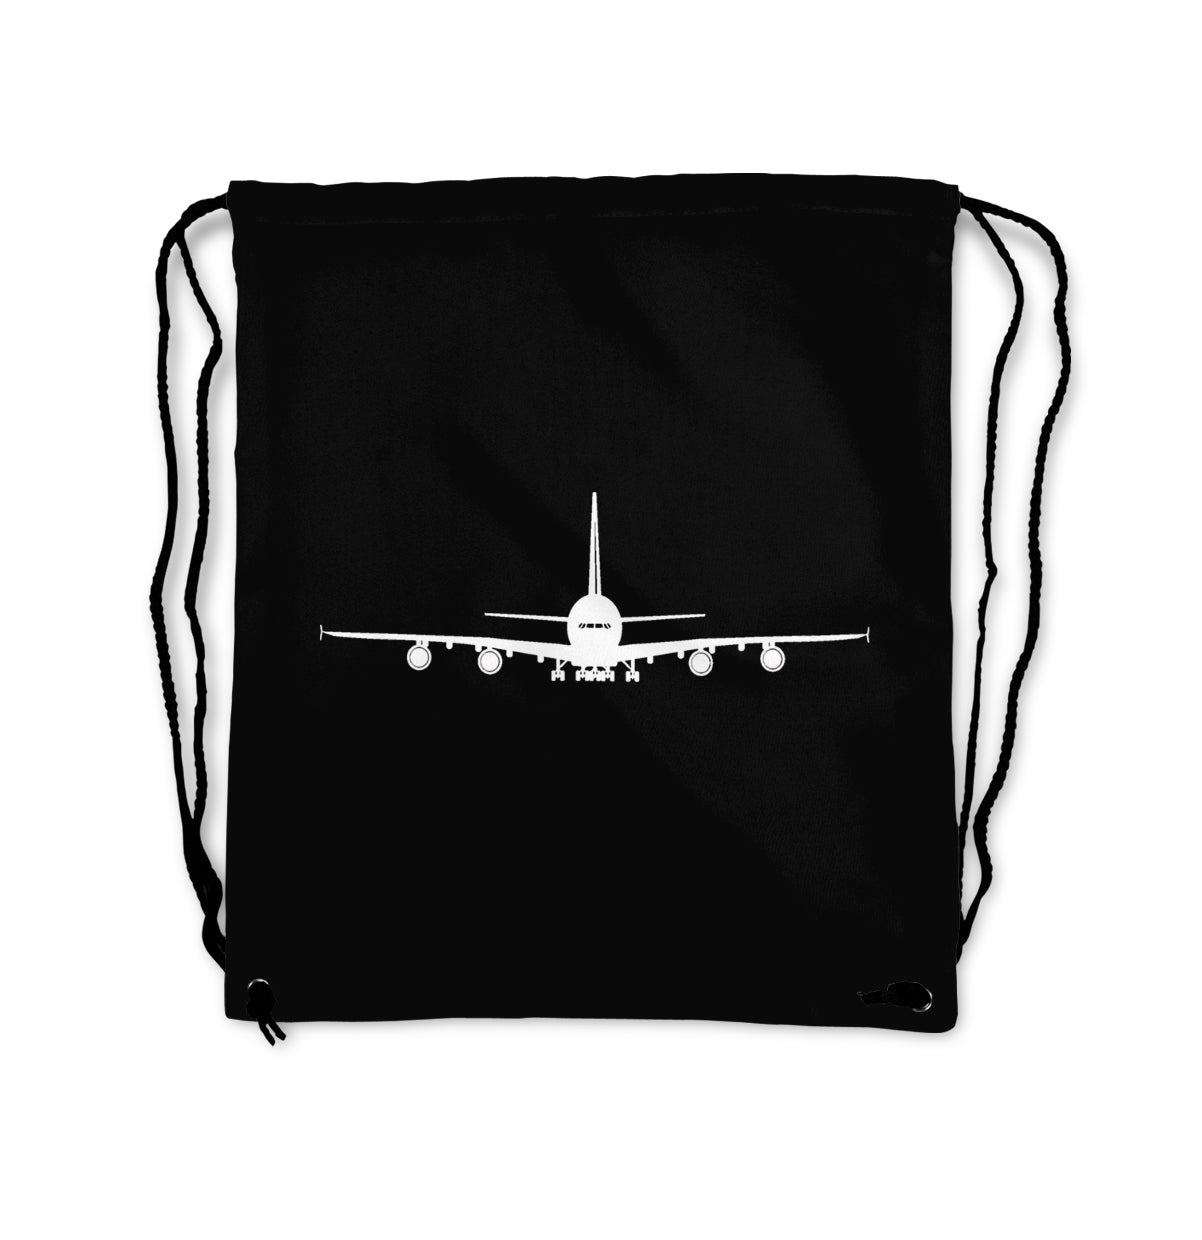 Airbus A380 Silhouette Designed Drawstring Bags